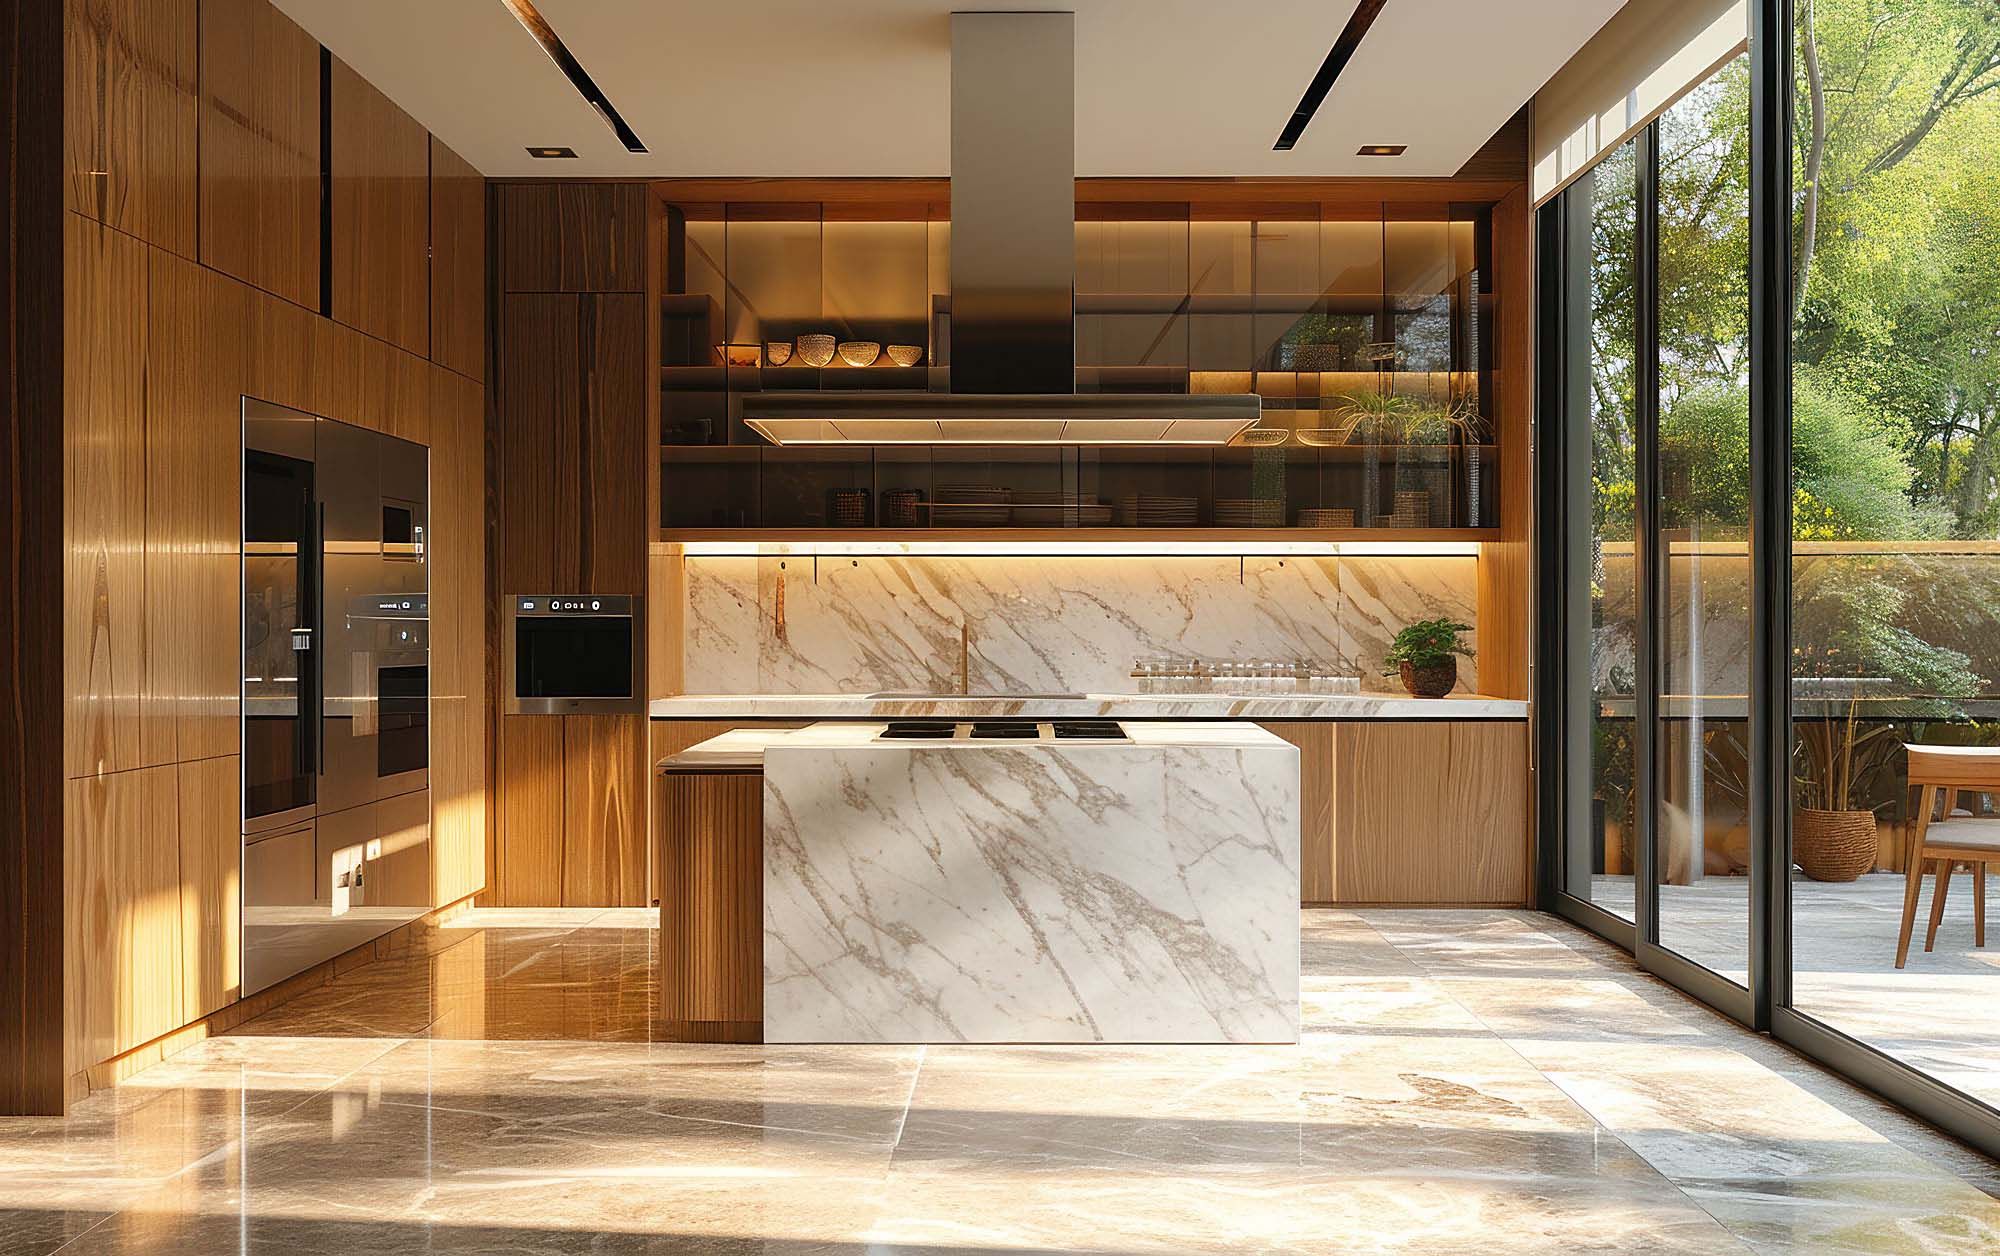 High-end kitchen finishes